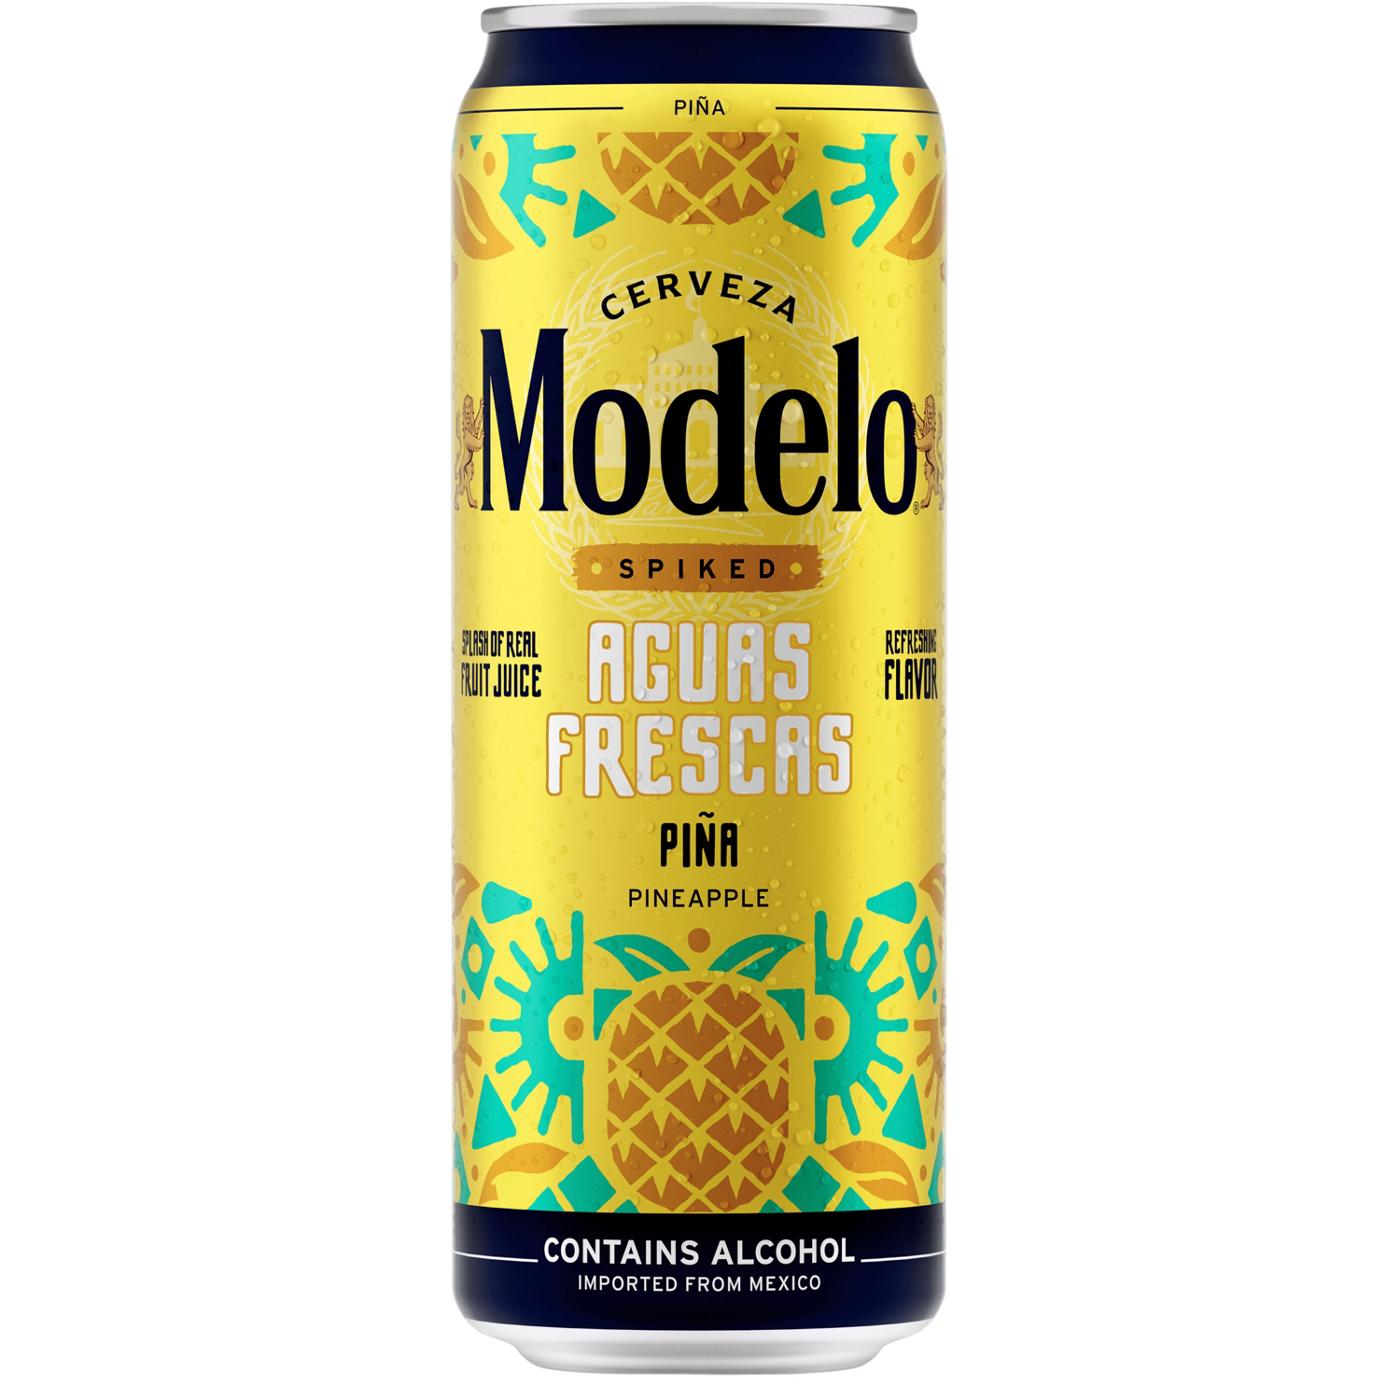 Modelo Spiked Aguas Frescas Pina Flavored Malt Beverage 24 oz Can; image 1 of 4